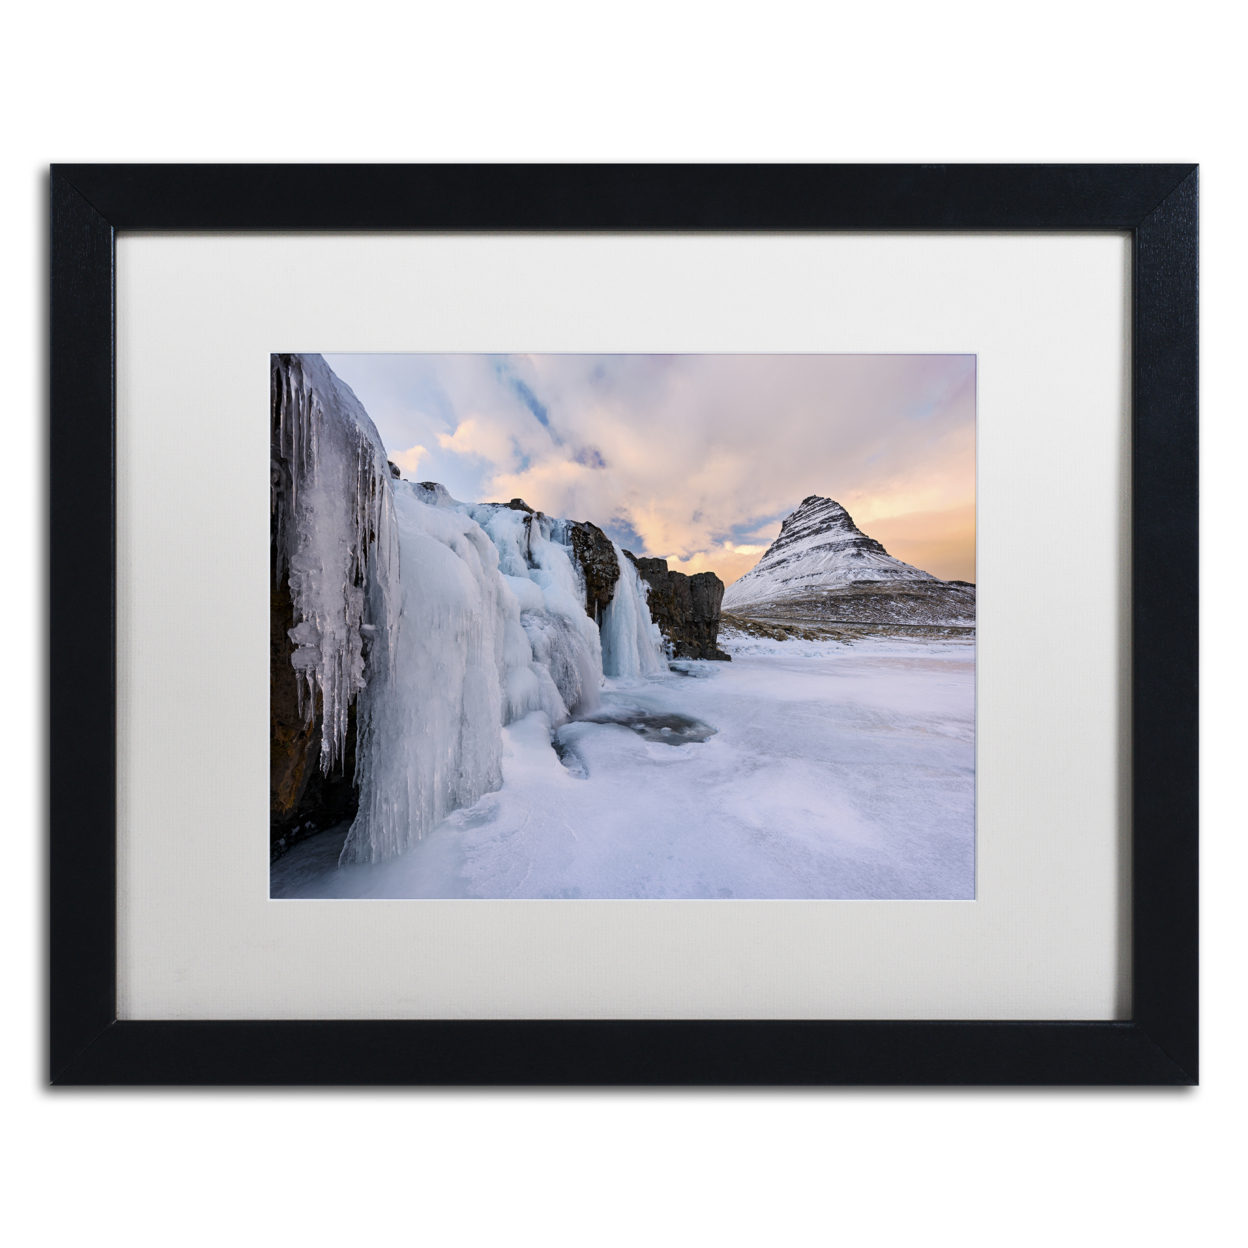 Michael Blanchette Photography 'Frozen Canopy' Black Wooden Framed Art 18 X 22 Inches